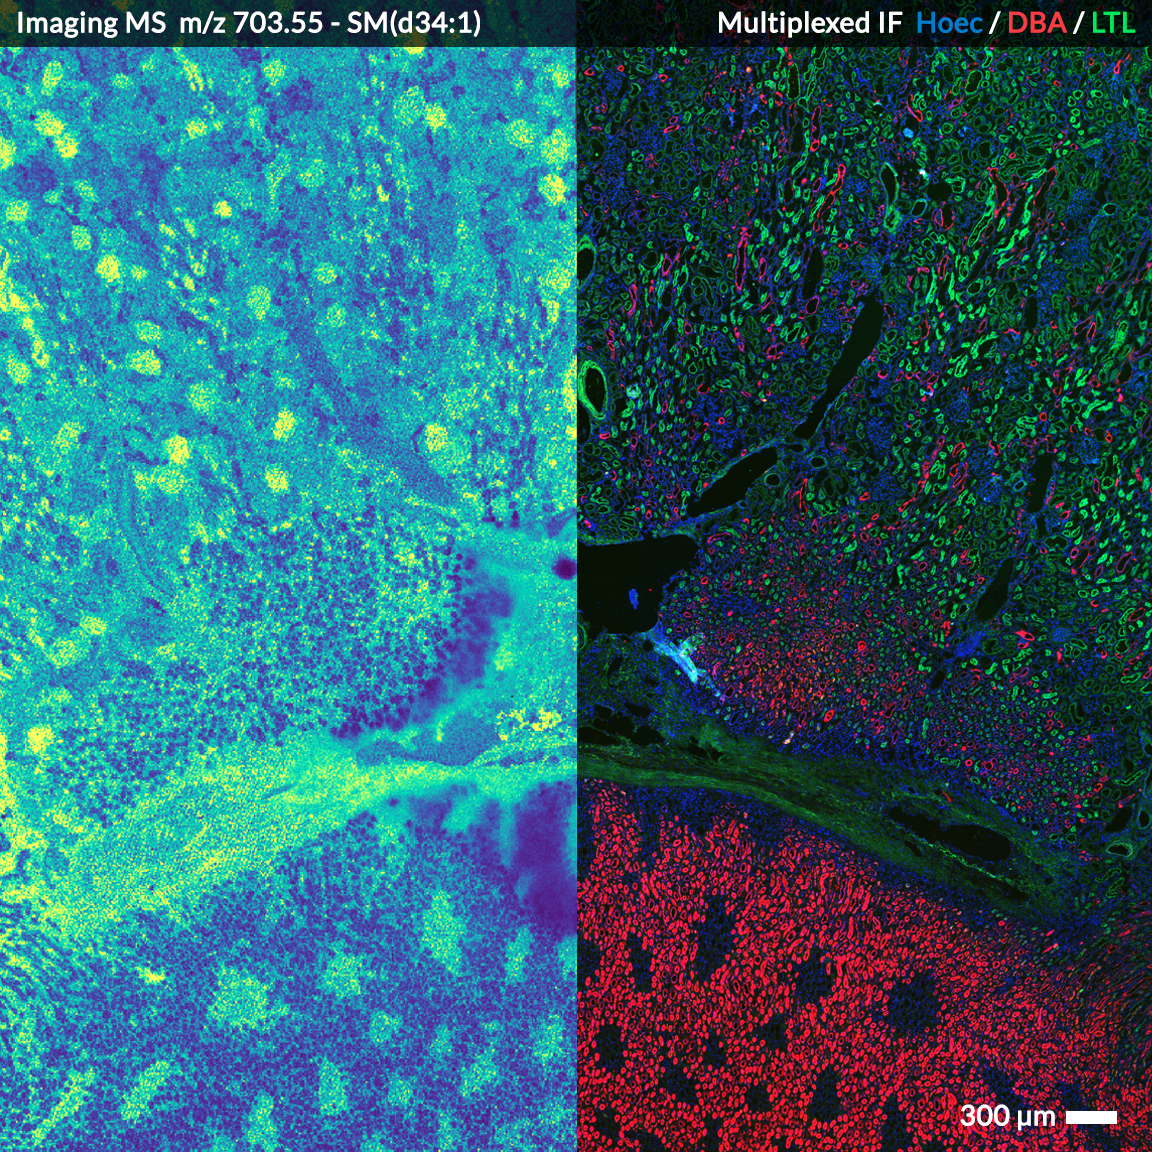 The same image of a section of human kidney tissue, split in half, with the left half of the image looking mostly blue with green/teal speckles, and the right half having blue, red, and green speckles throughout..